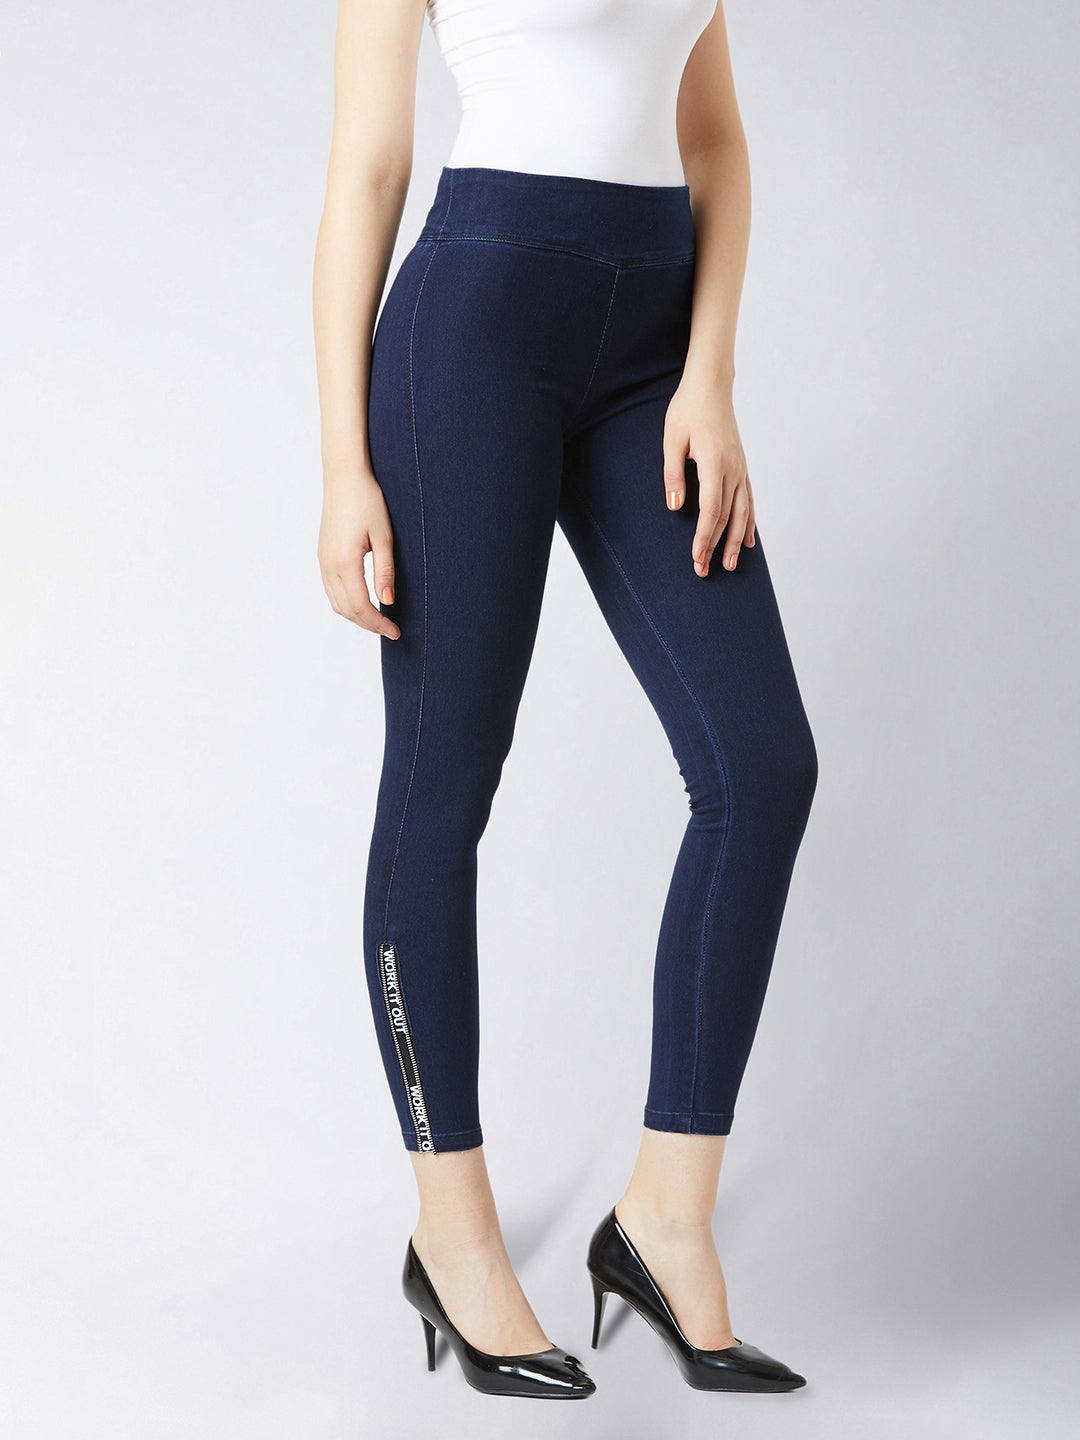 MISS CHASE | Navy Blue Super Skinny Fit Twill Tape High Rise Regular Length Stretchable Denim Jeggings